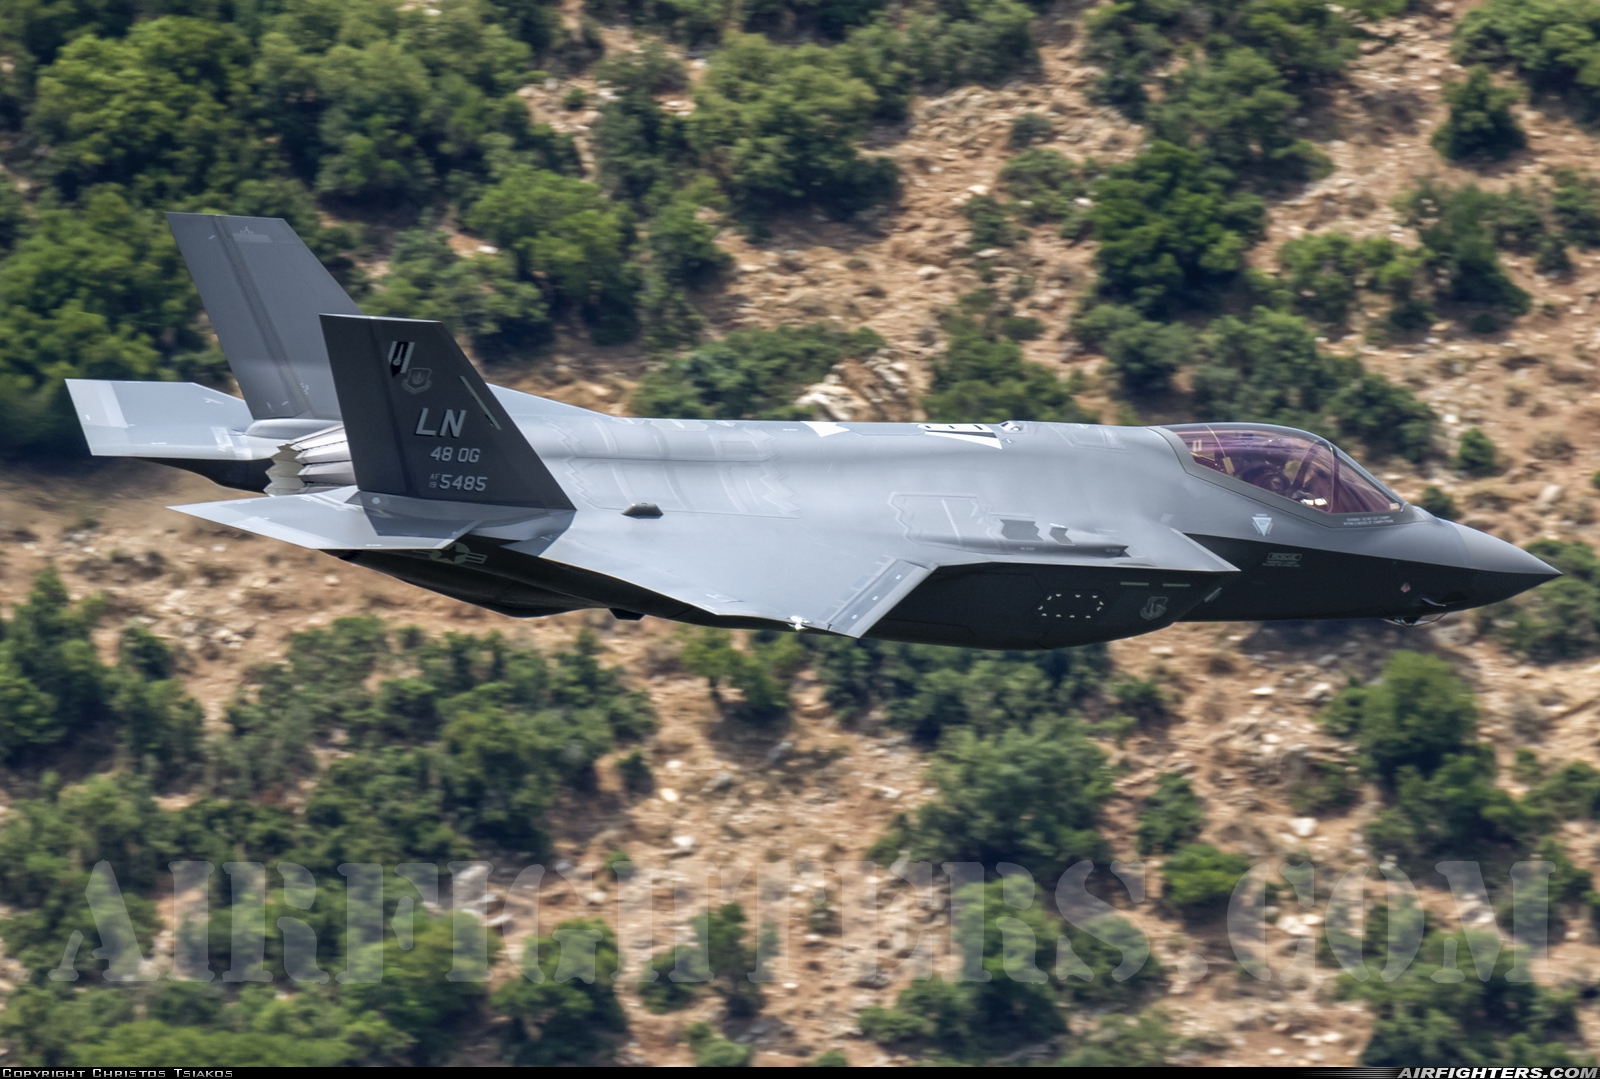 USA - Air Force Lockheed Martin F-35A Lightning II 19-5485 at Off-Airport - Vouraikos Canyon, Greece